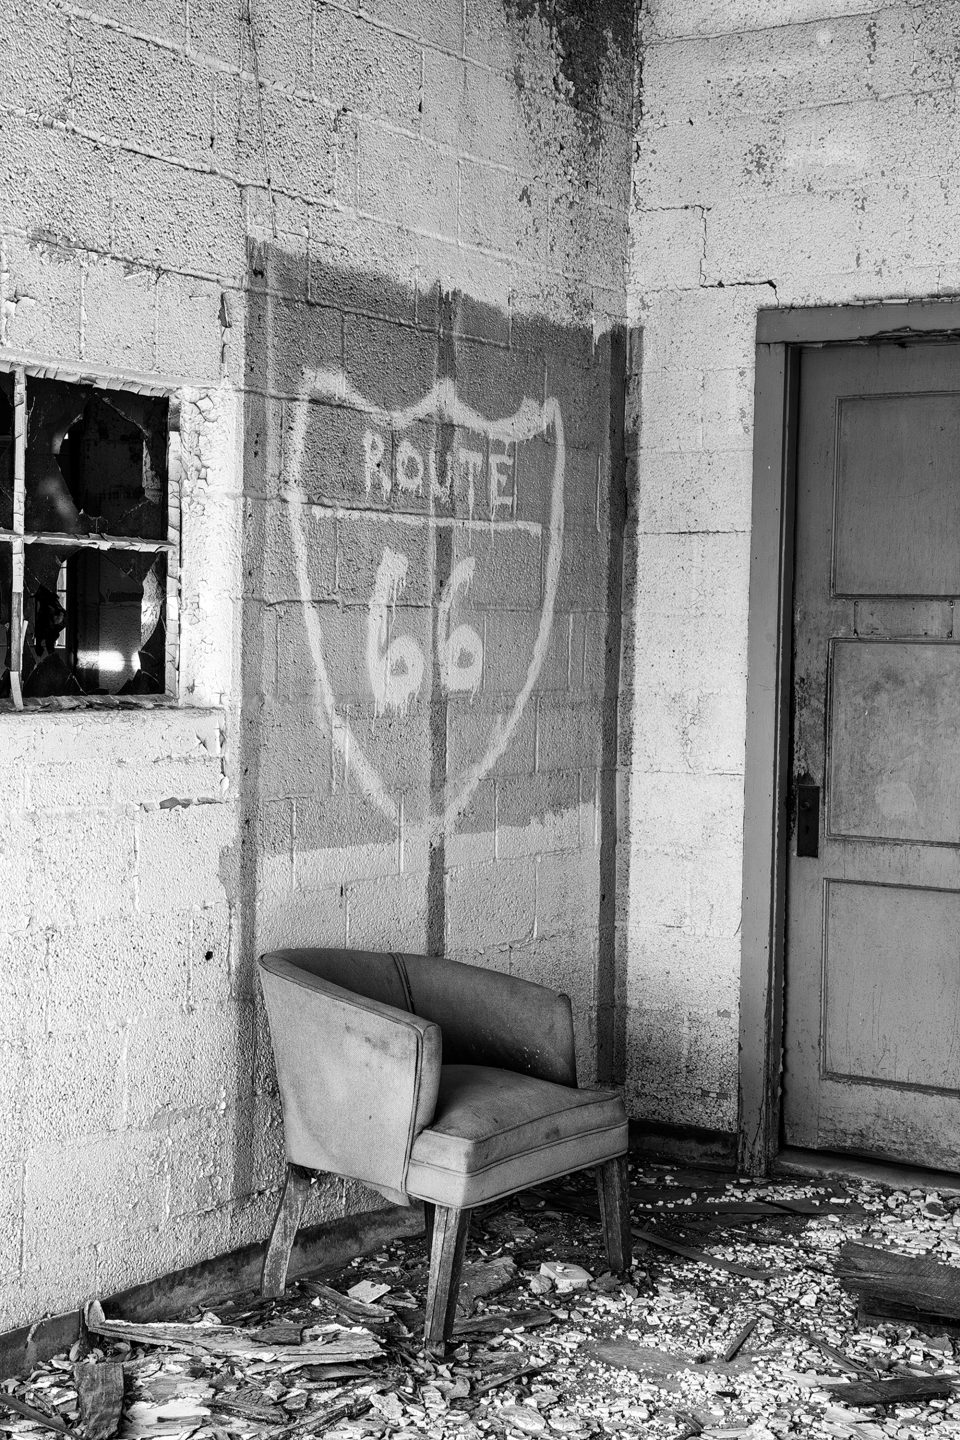 Black and white photograph of a chair beneath a hand-painted Route 66 sign, inside the abandoned Texas Longhorn Motel on Route 66 in Glenrio ghost town, Texas.